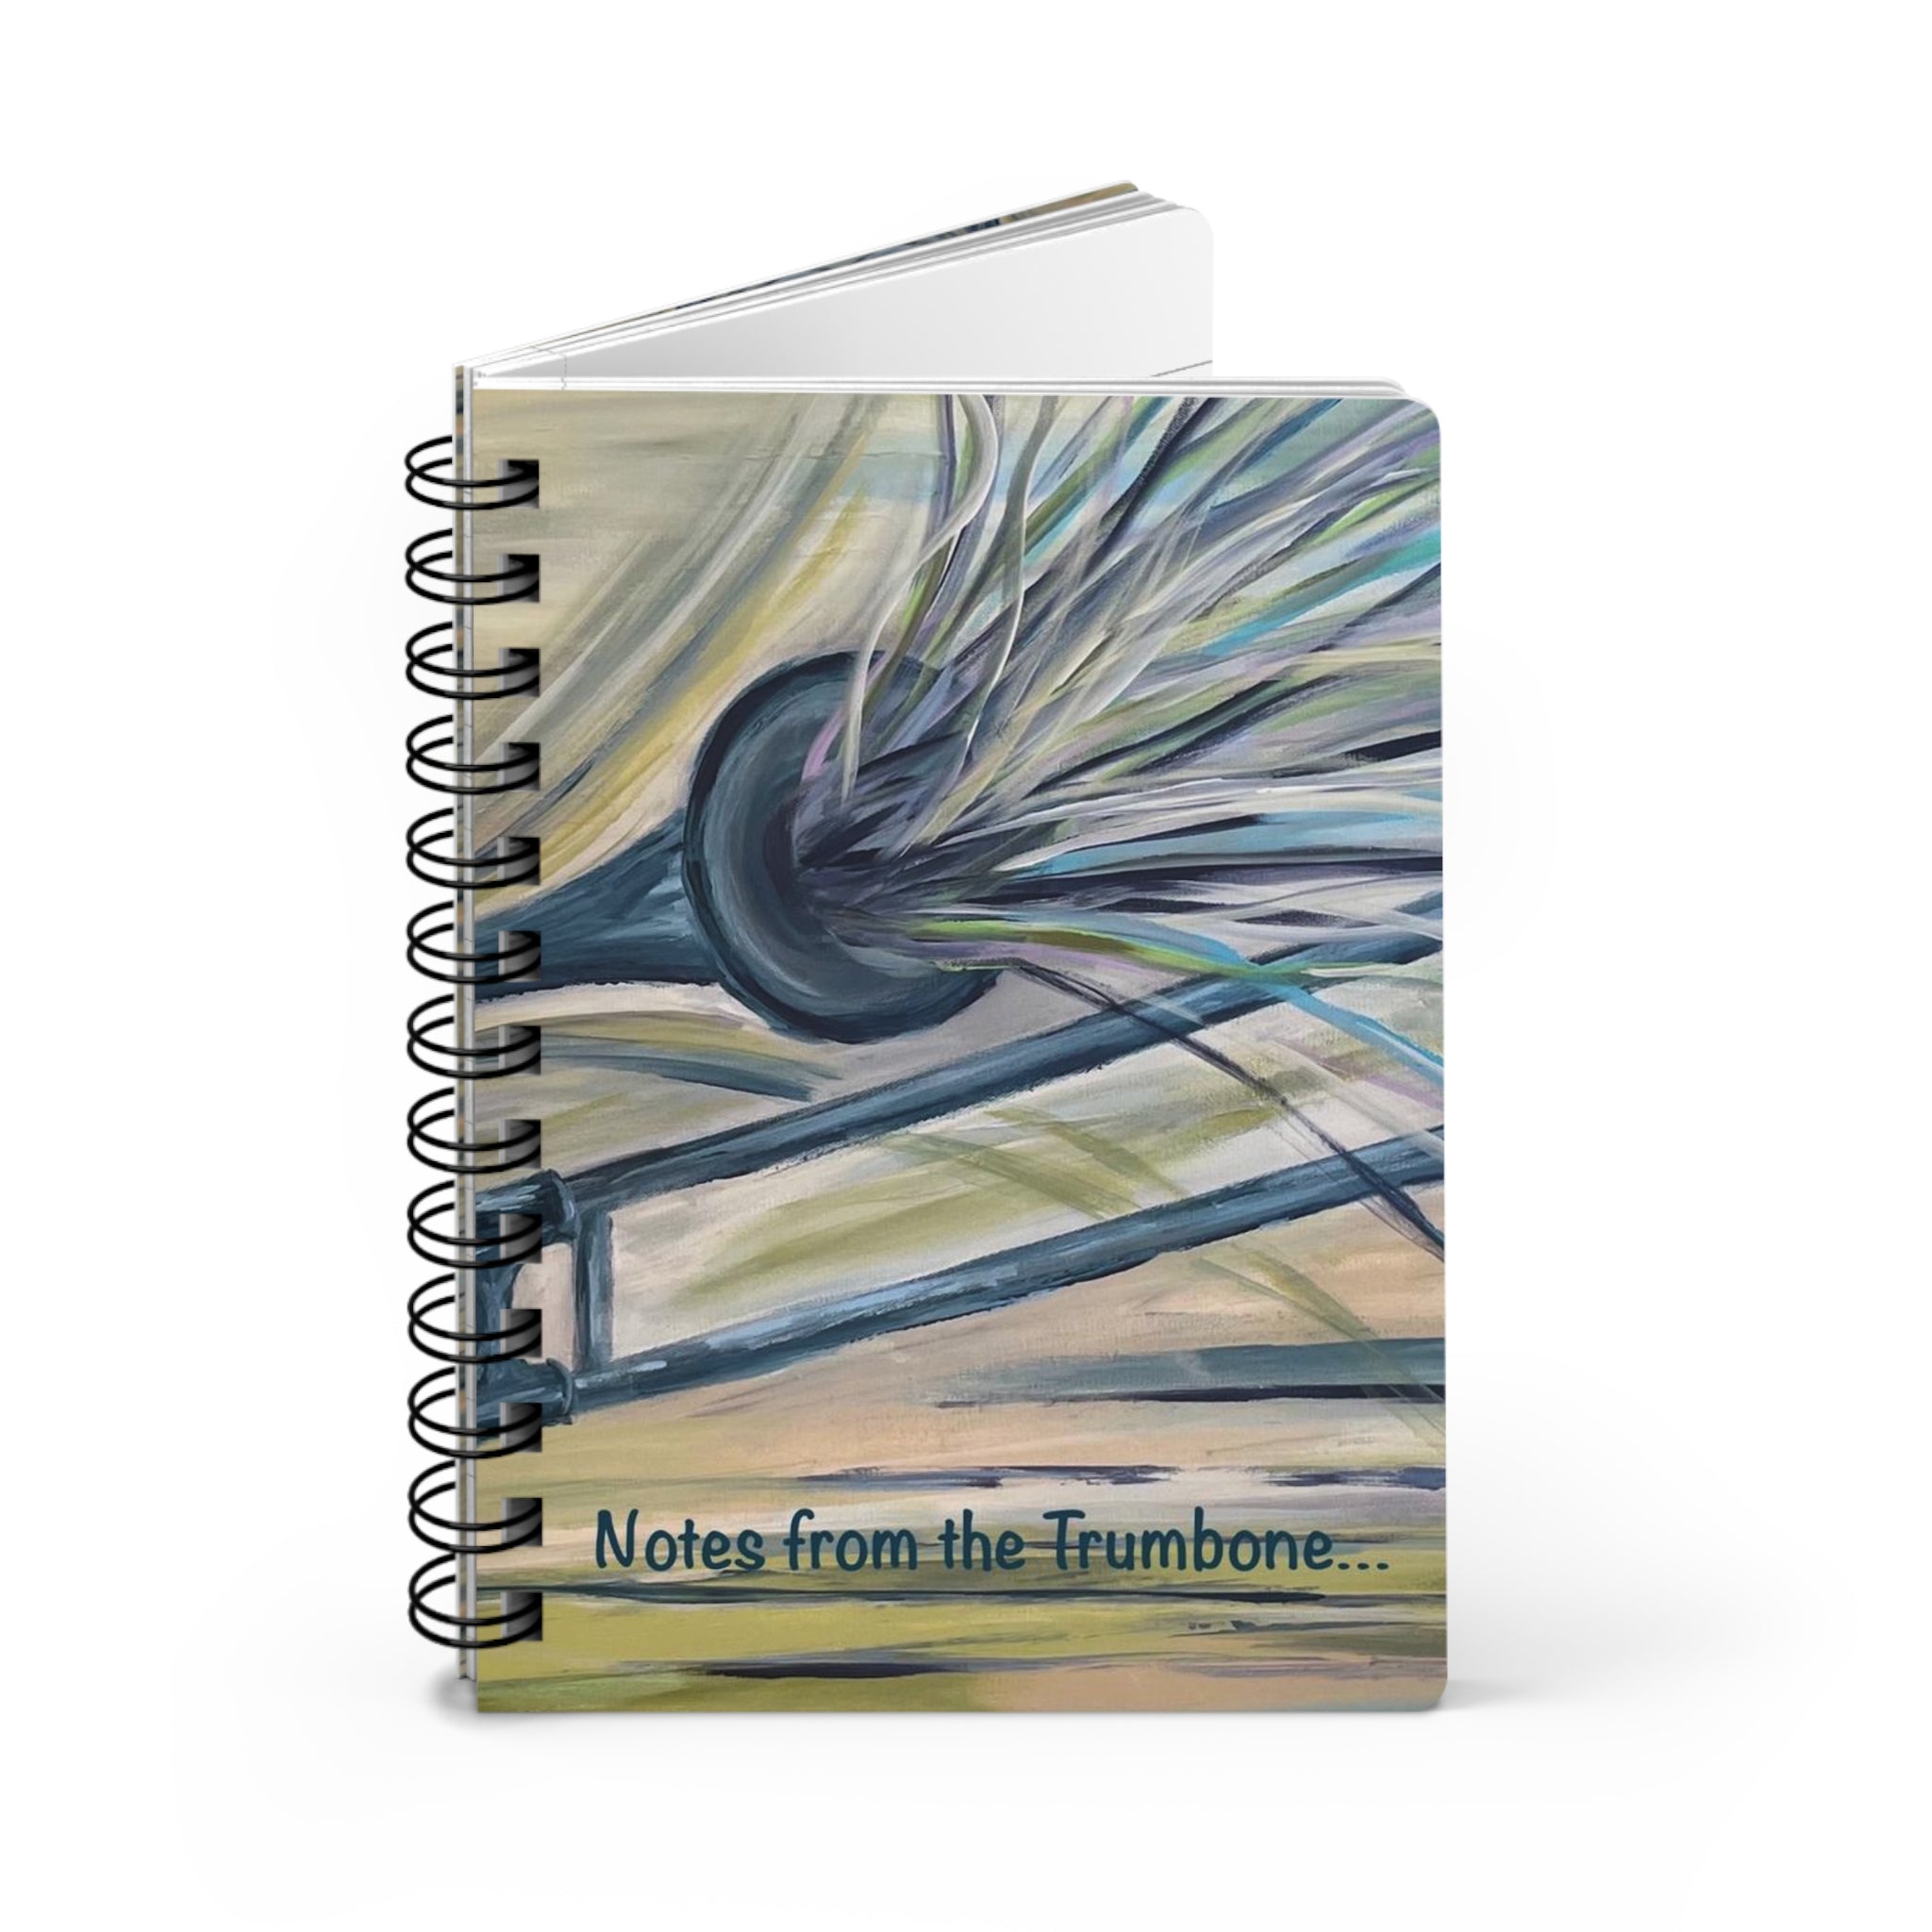 Notes from the Trumbone!  Write down your dreams in style in our spiral-bound journal featuring "Trumbone Joyeux". Our notebooks feature a durable thick gloss laminated protective cover, with pattern repeat created from the original artwork on the inside front and back covers.  Made in the USA!  Journal comes in 5x7 size with 150 pages of lined paper with preforated eadge for easy tear removal!   .: Front, back and inside cover print .: 150 lined pages (75 sheets) .: Glossy laminated cover